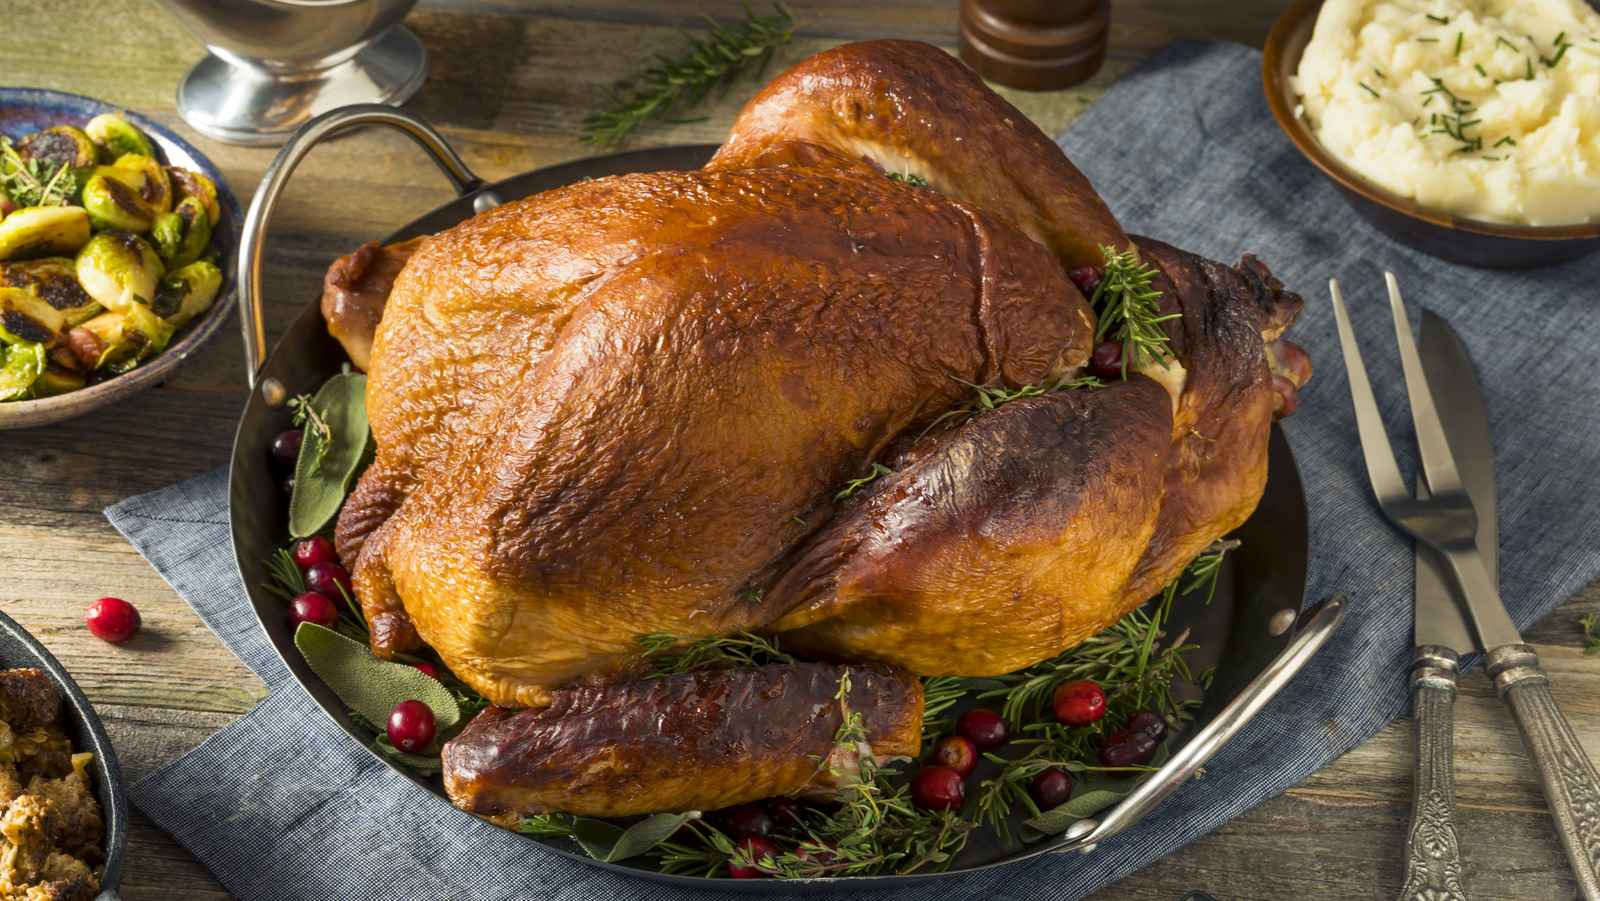 https://www.tastingtable.com/img/gallery/should-you-roast-turkey-covered-or-uncovered/l-intro-1668820488.jpg